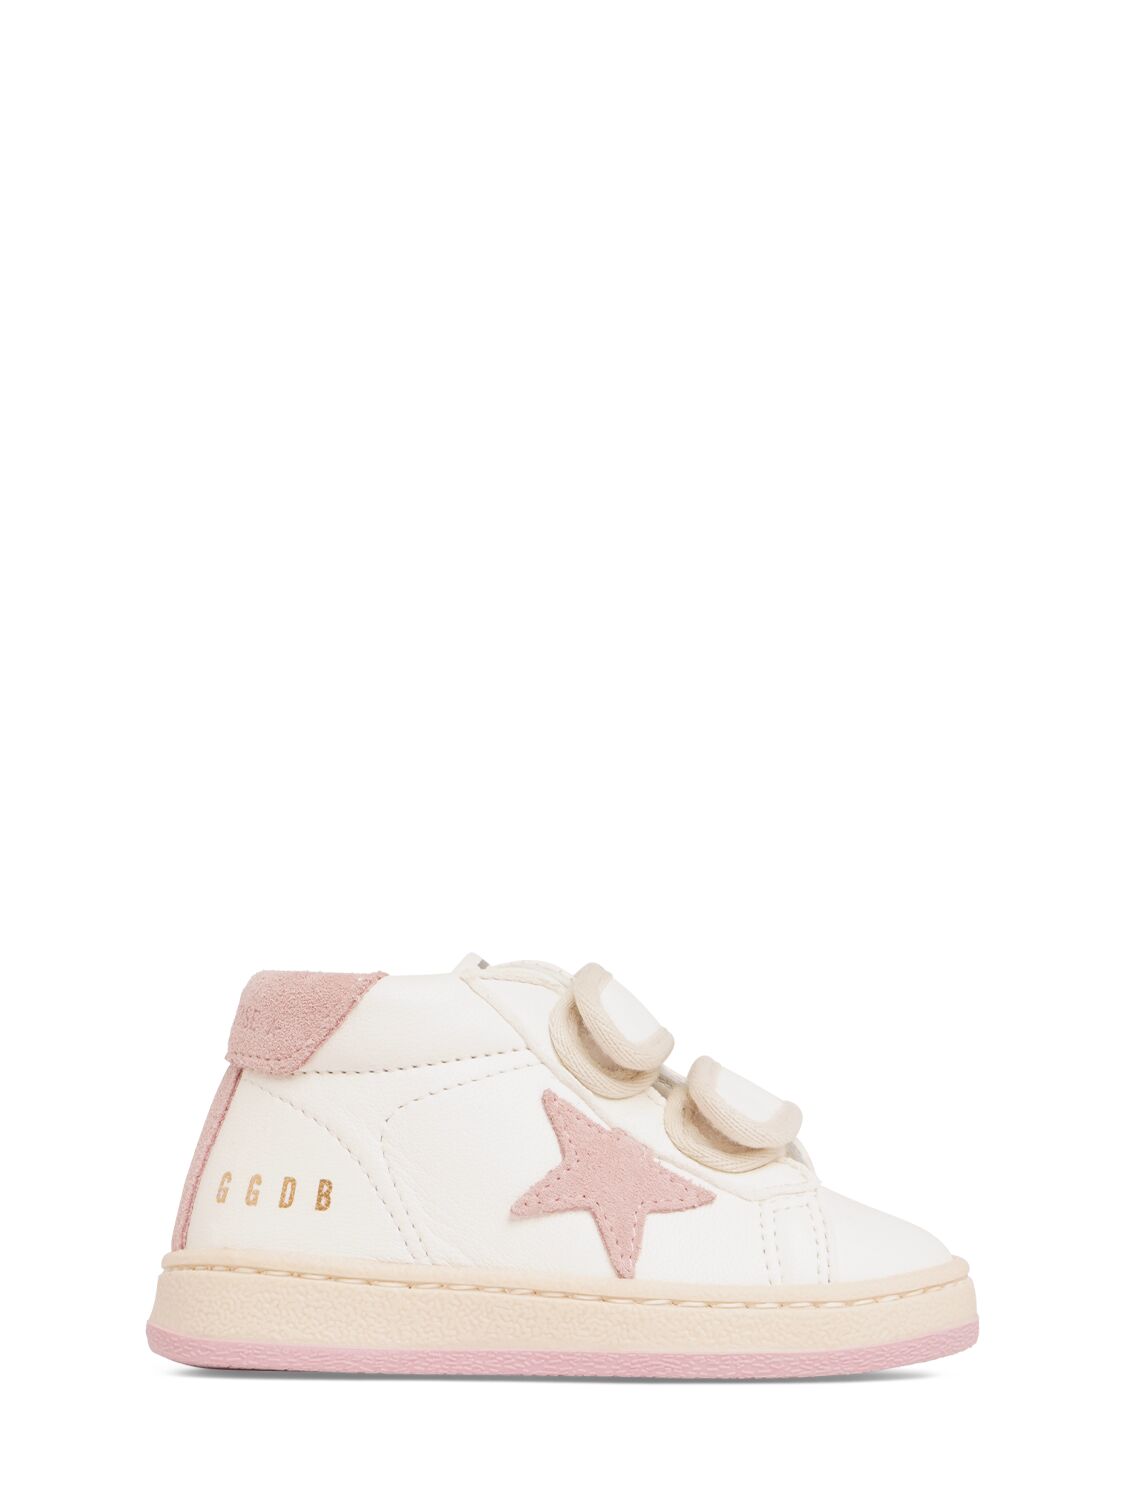 June Strap Leather Star Sneakers